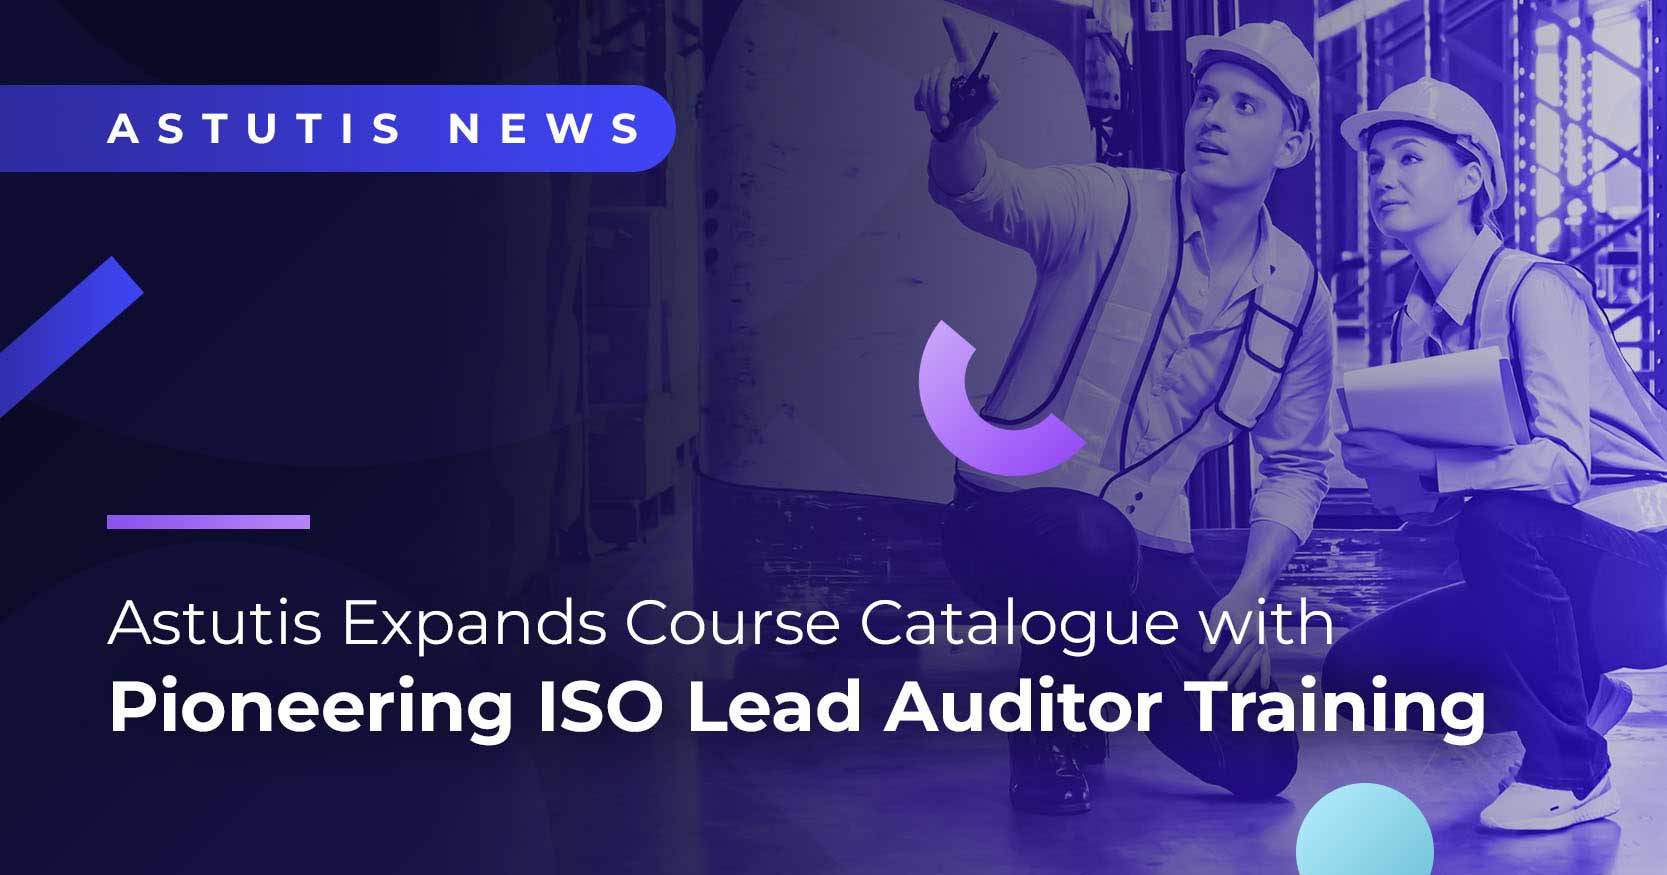 Astutis Expands Course Catalogue with Pioneering ISO Lead Auditor Training Image